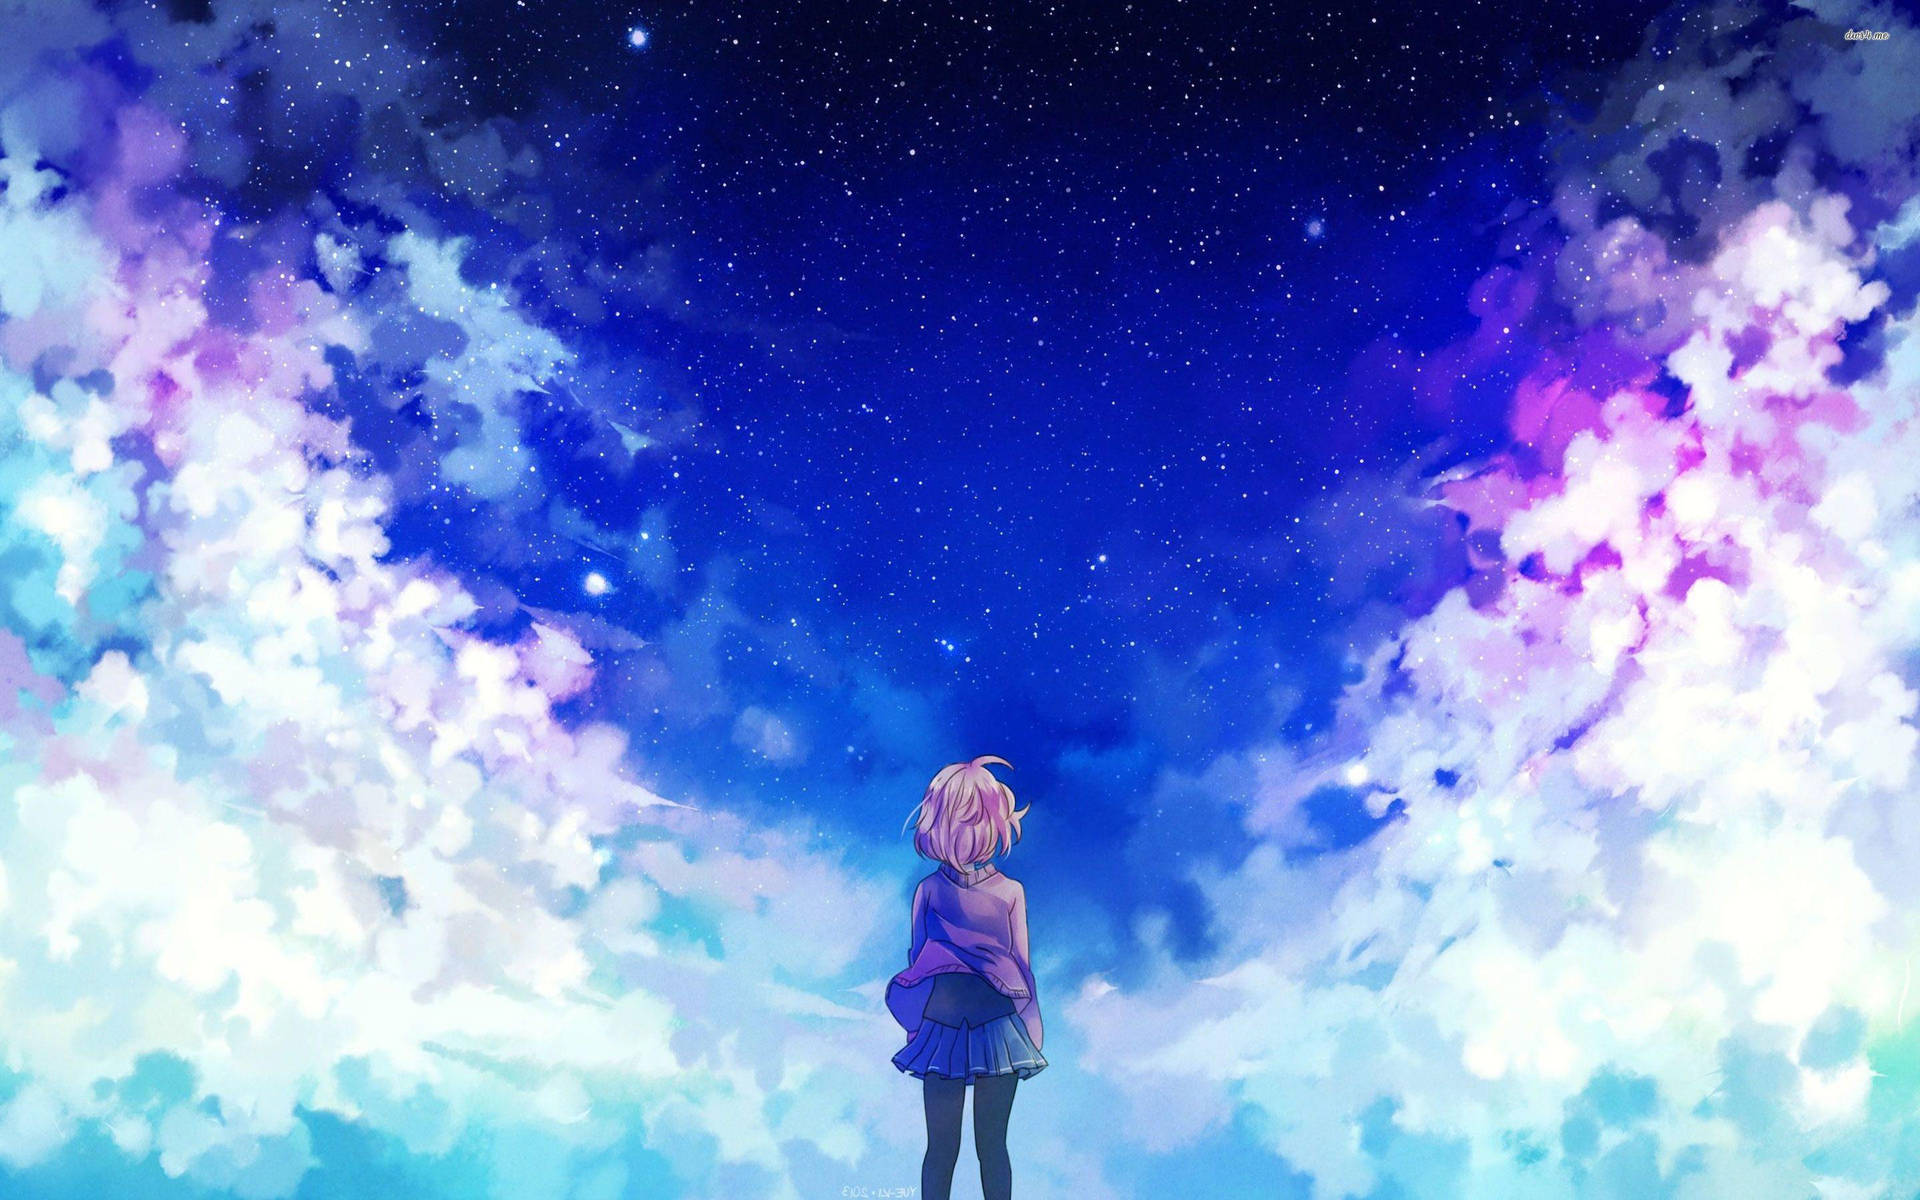 Aesthetic Anime Girl On Starry Cloud Background